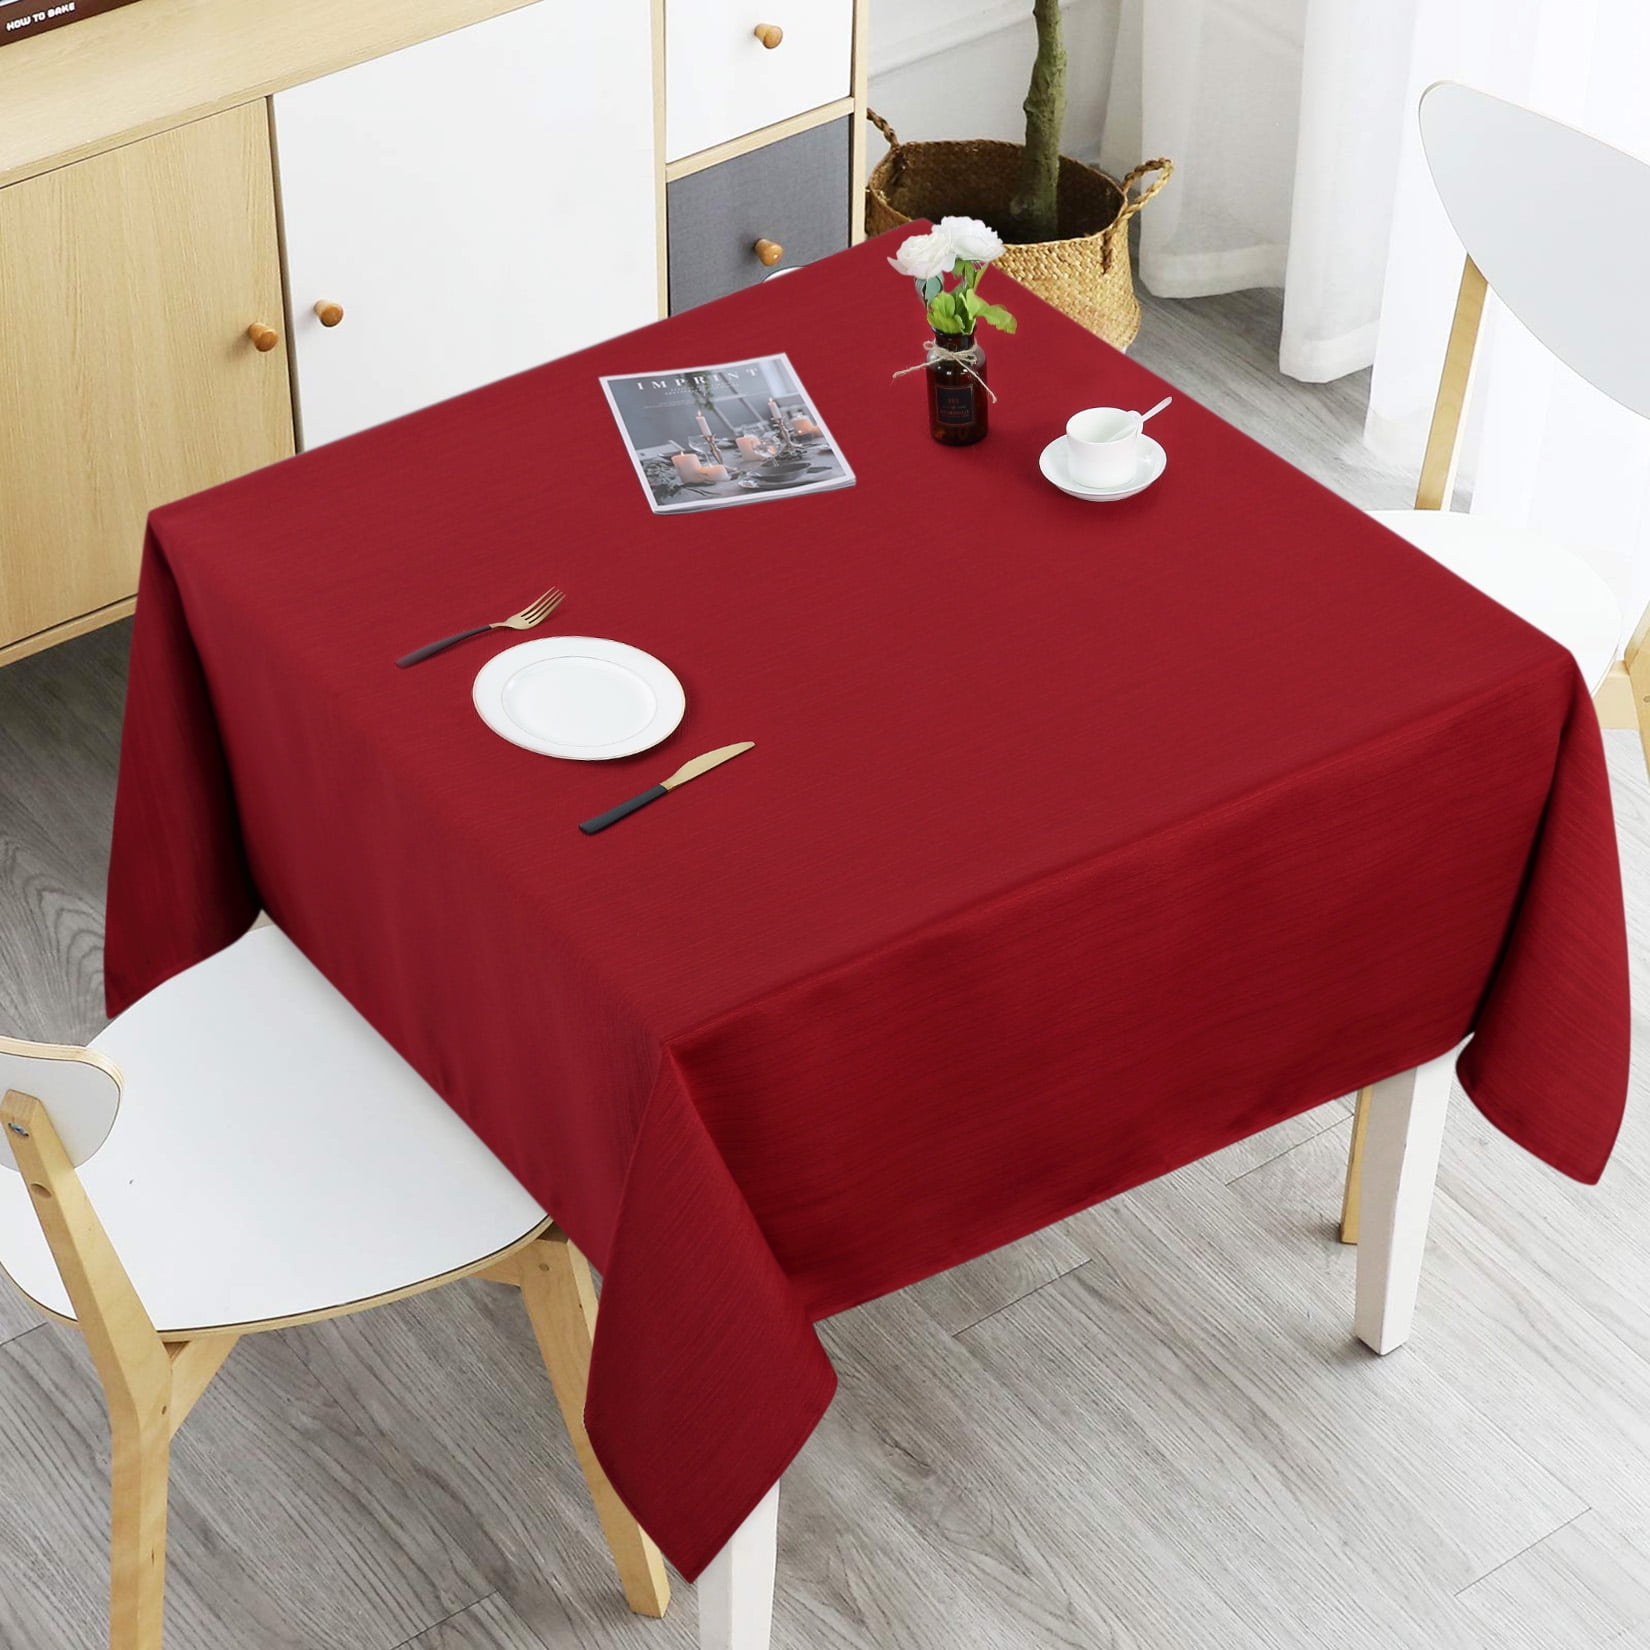 3D Polyester Tablecloth cloth Dining Kitchen Table Cover Protector Washable NEW 